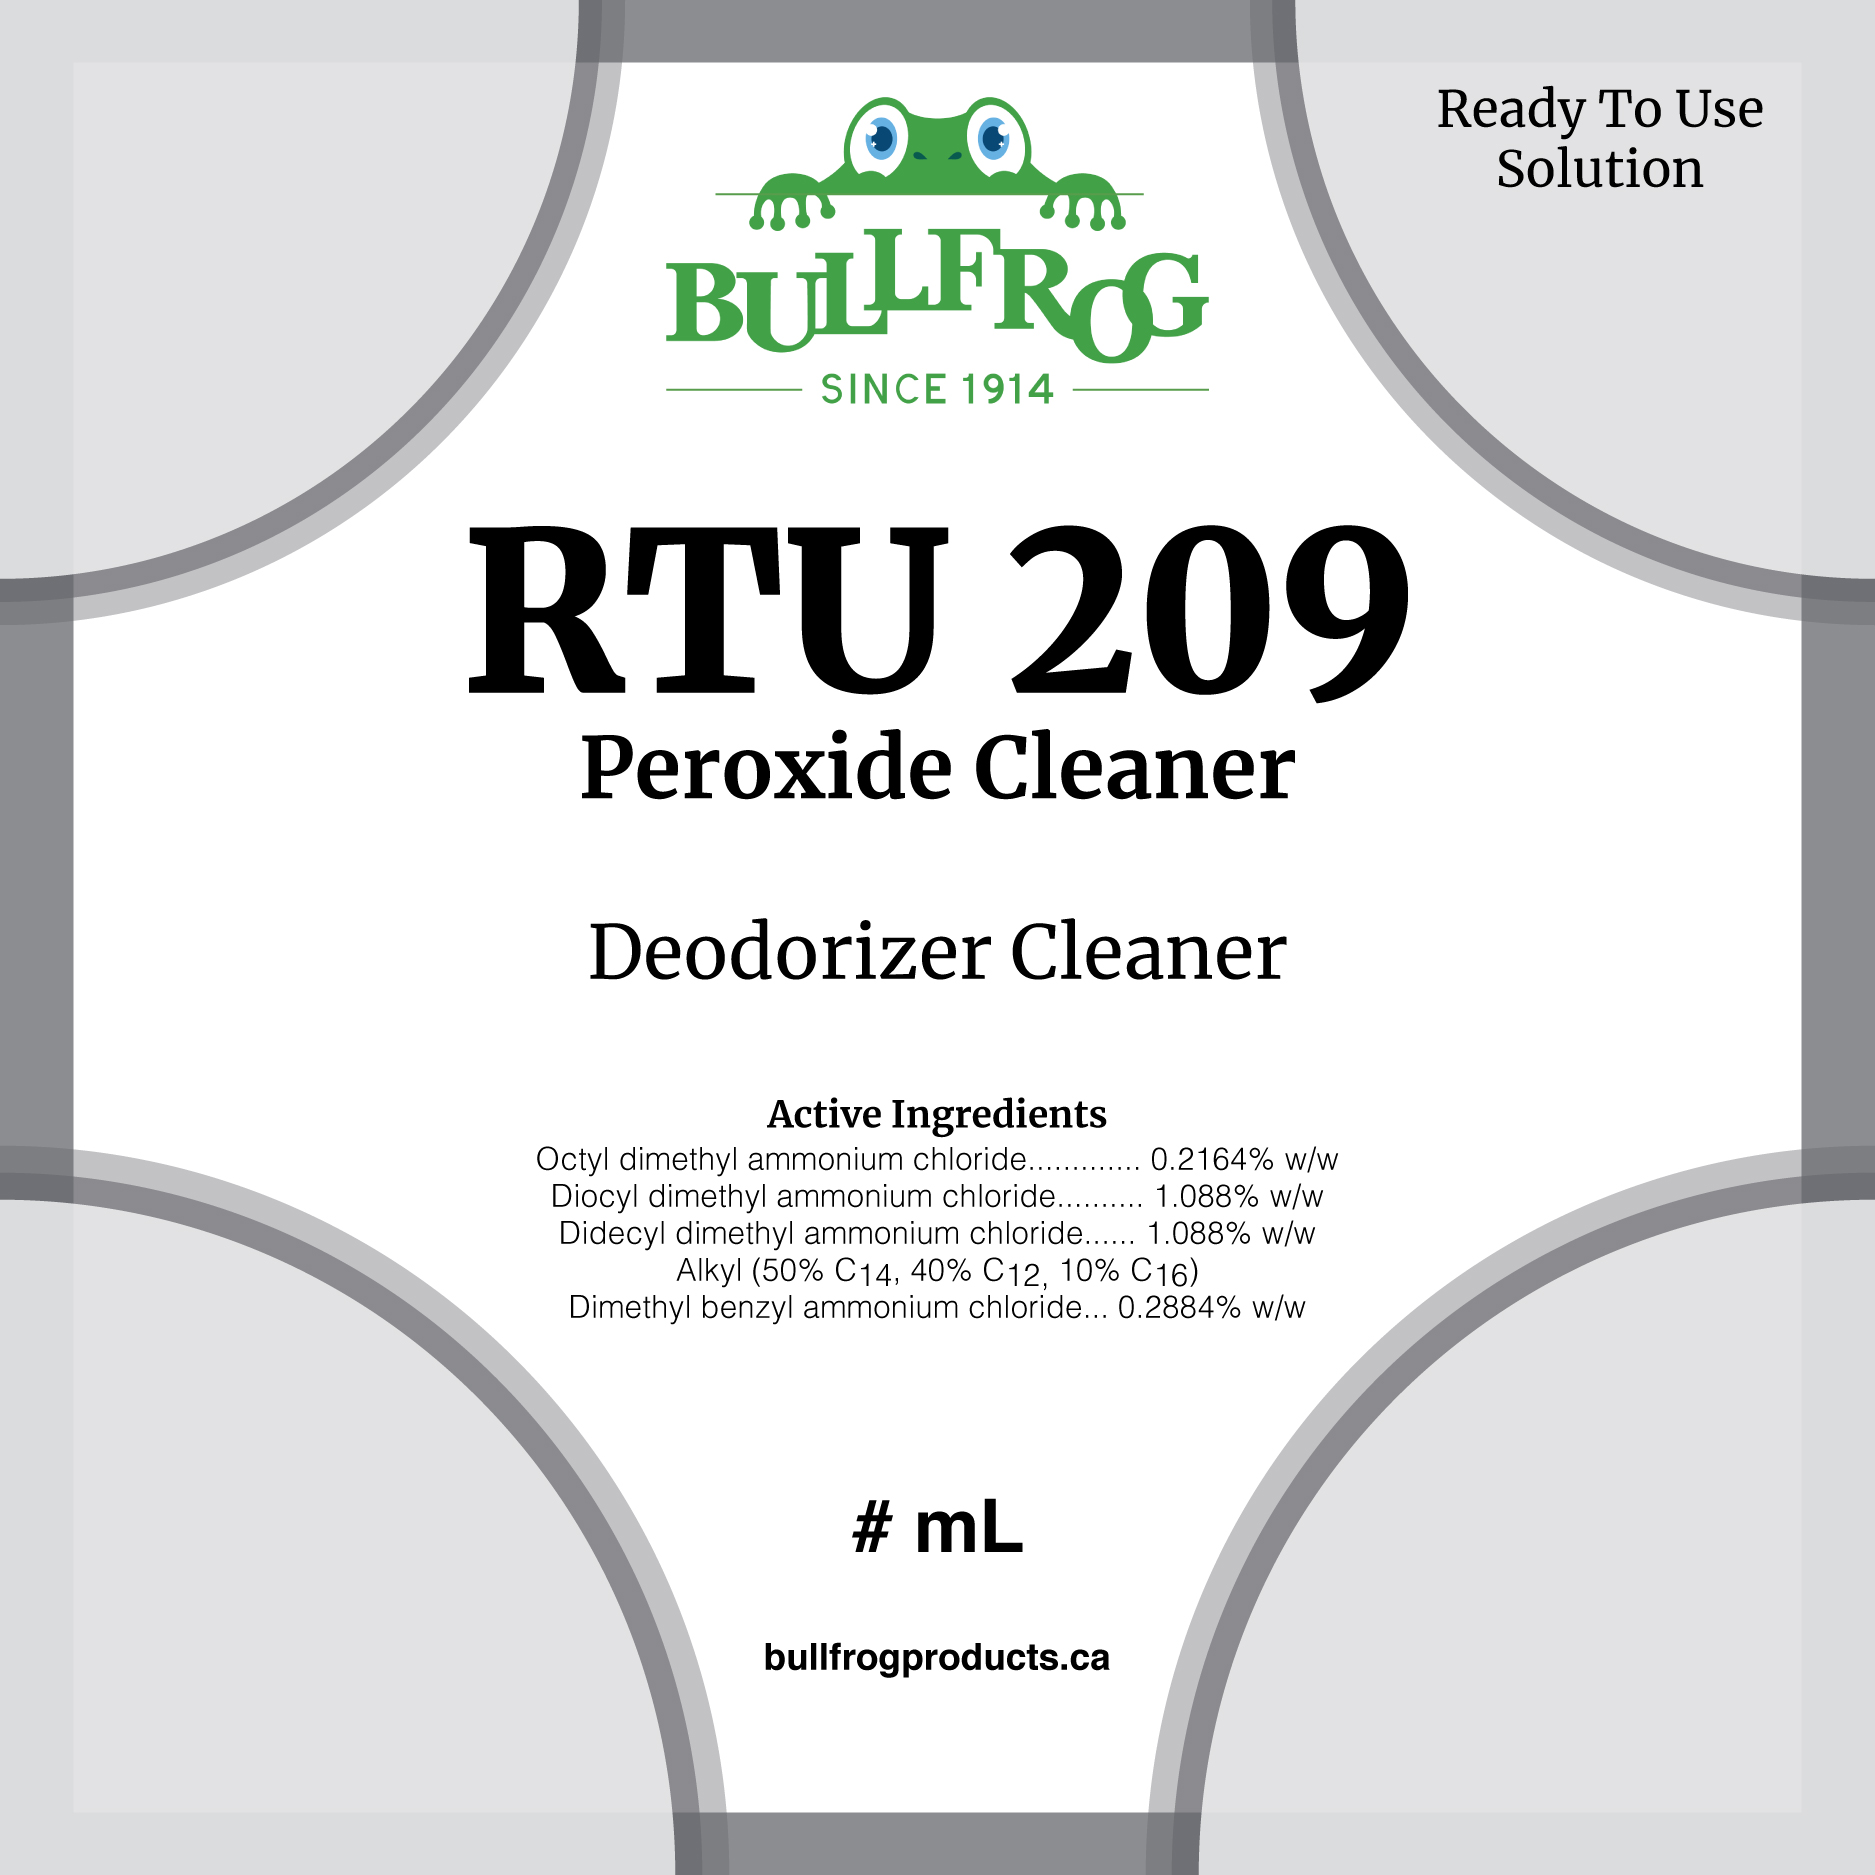 RTU 209 Front Label image and 1L squeeze bottle image